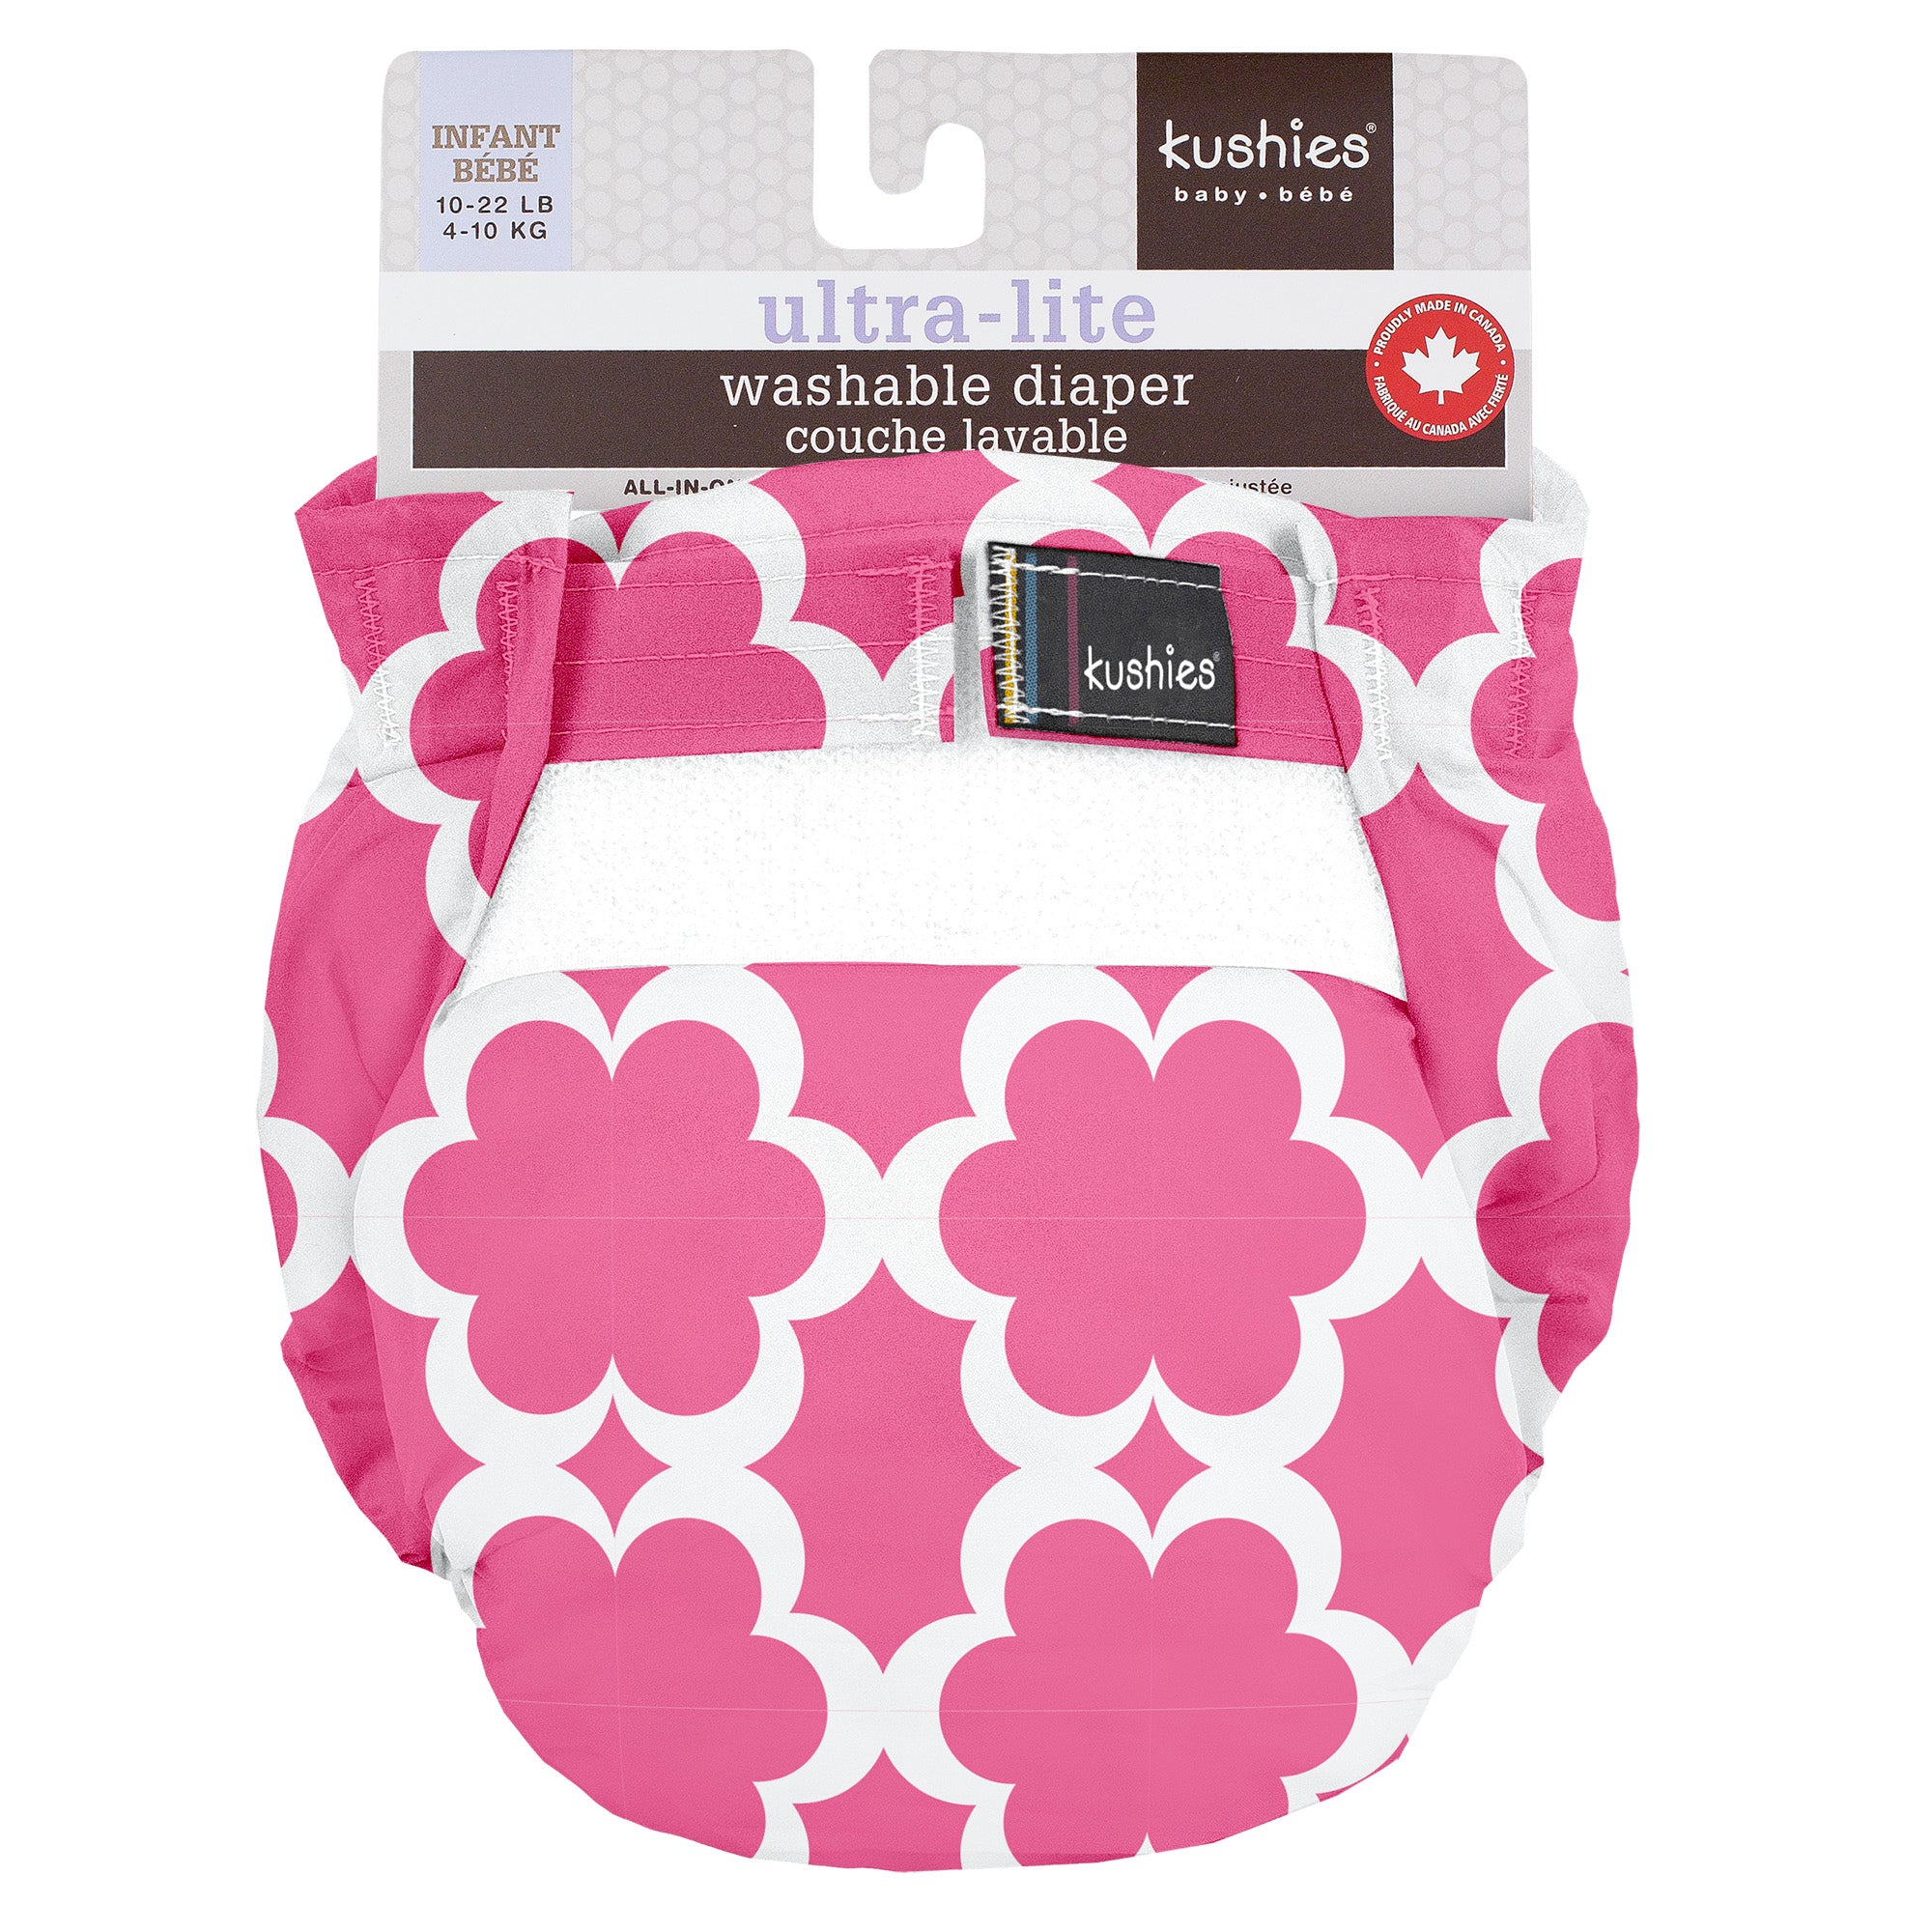 cloth diapers - Kushies Baby CANADA Inc